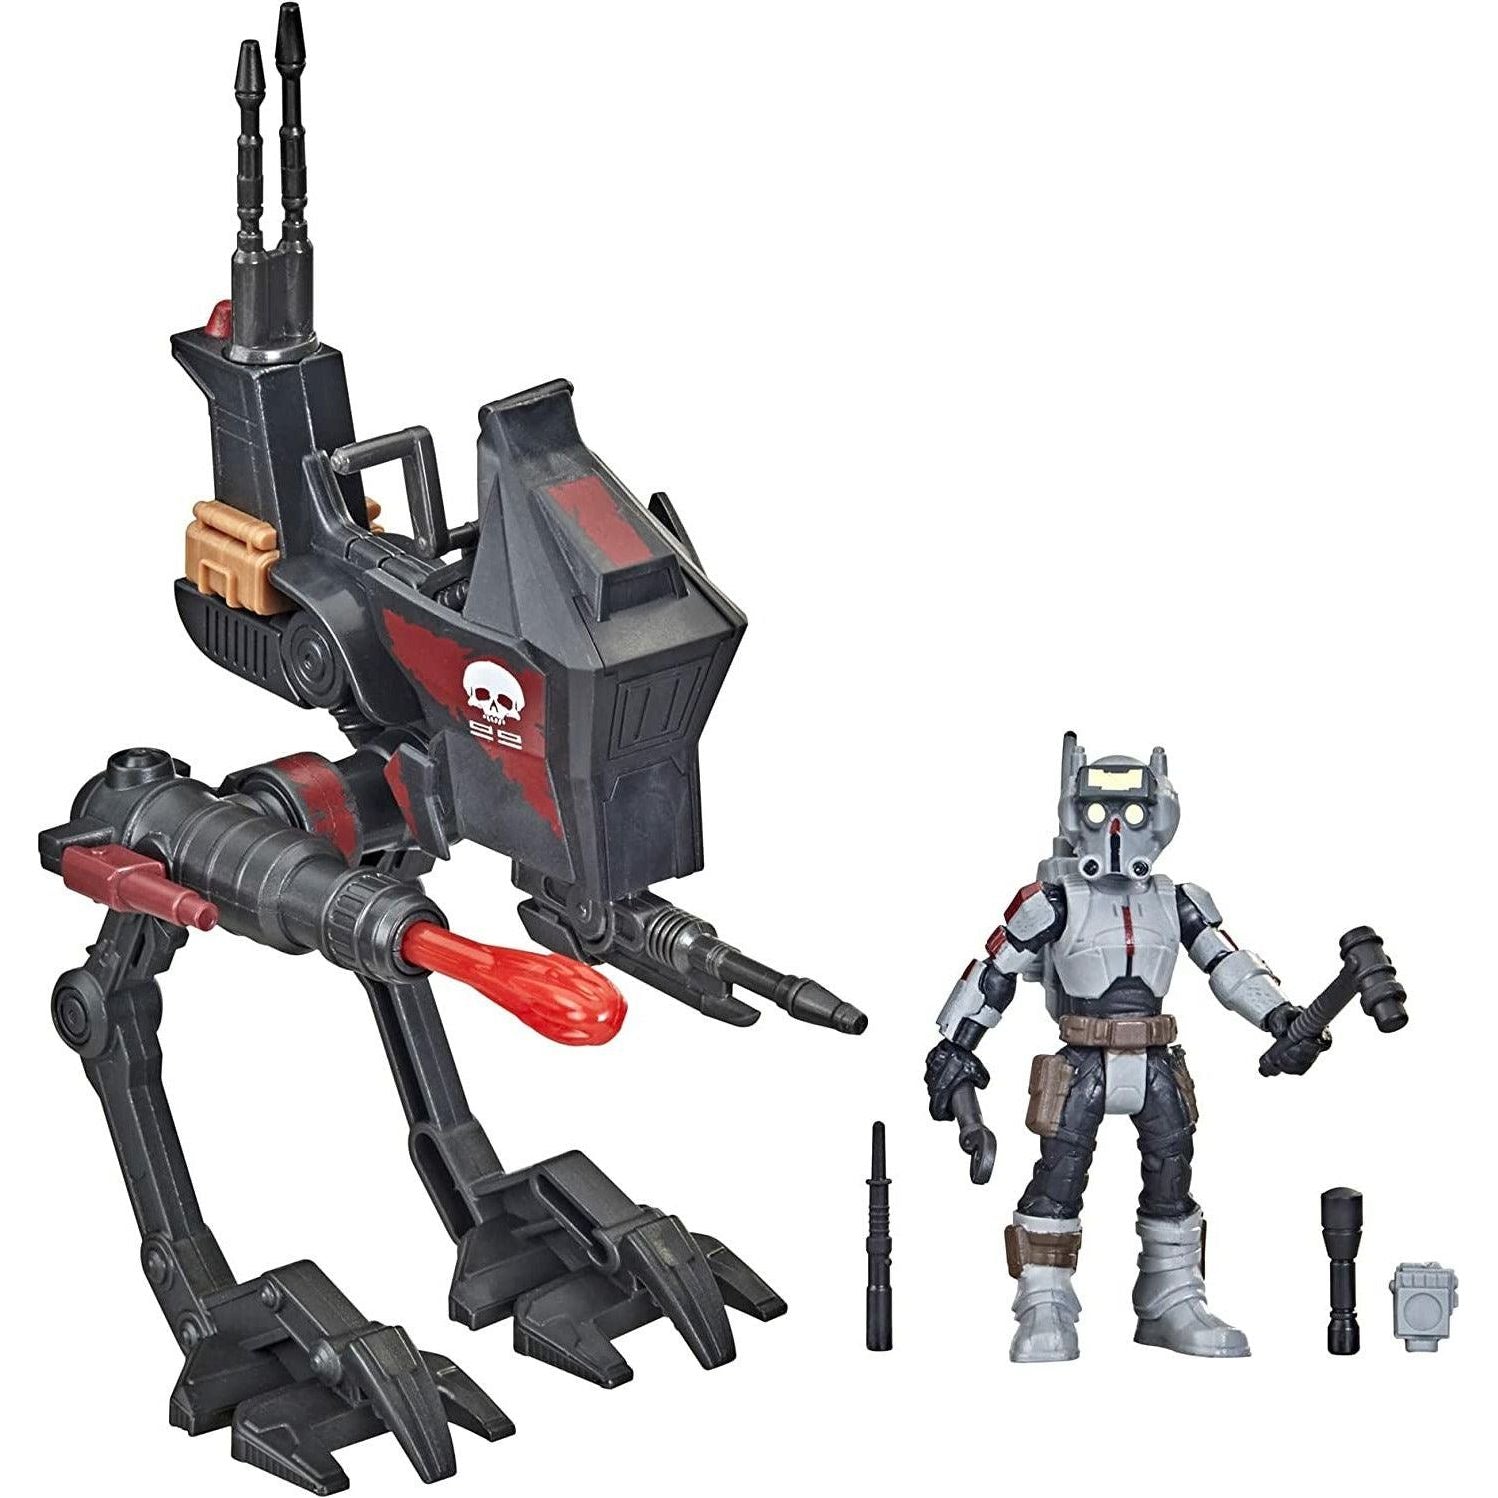 Star Wars Mission Fleet Expedition Class Tech (Bad Batch) at-RT Ambush 2.5-Inch-Scale Figure and Vehicle Set - BumbleToys - 4+ Years, Boys, OXE, star wars